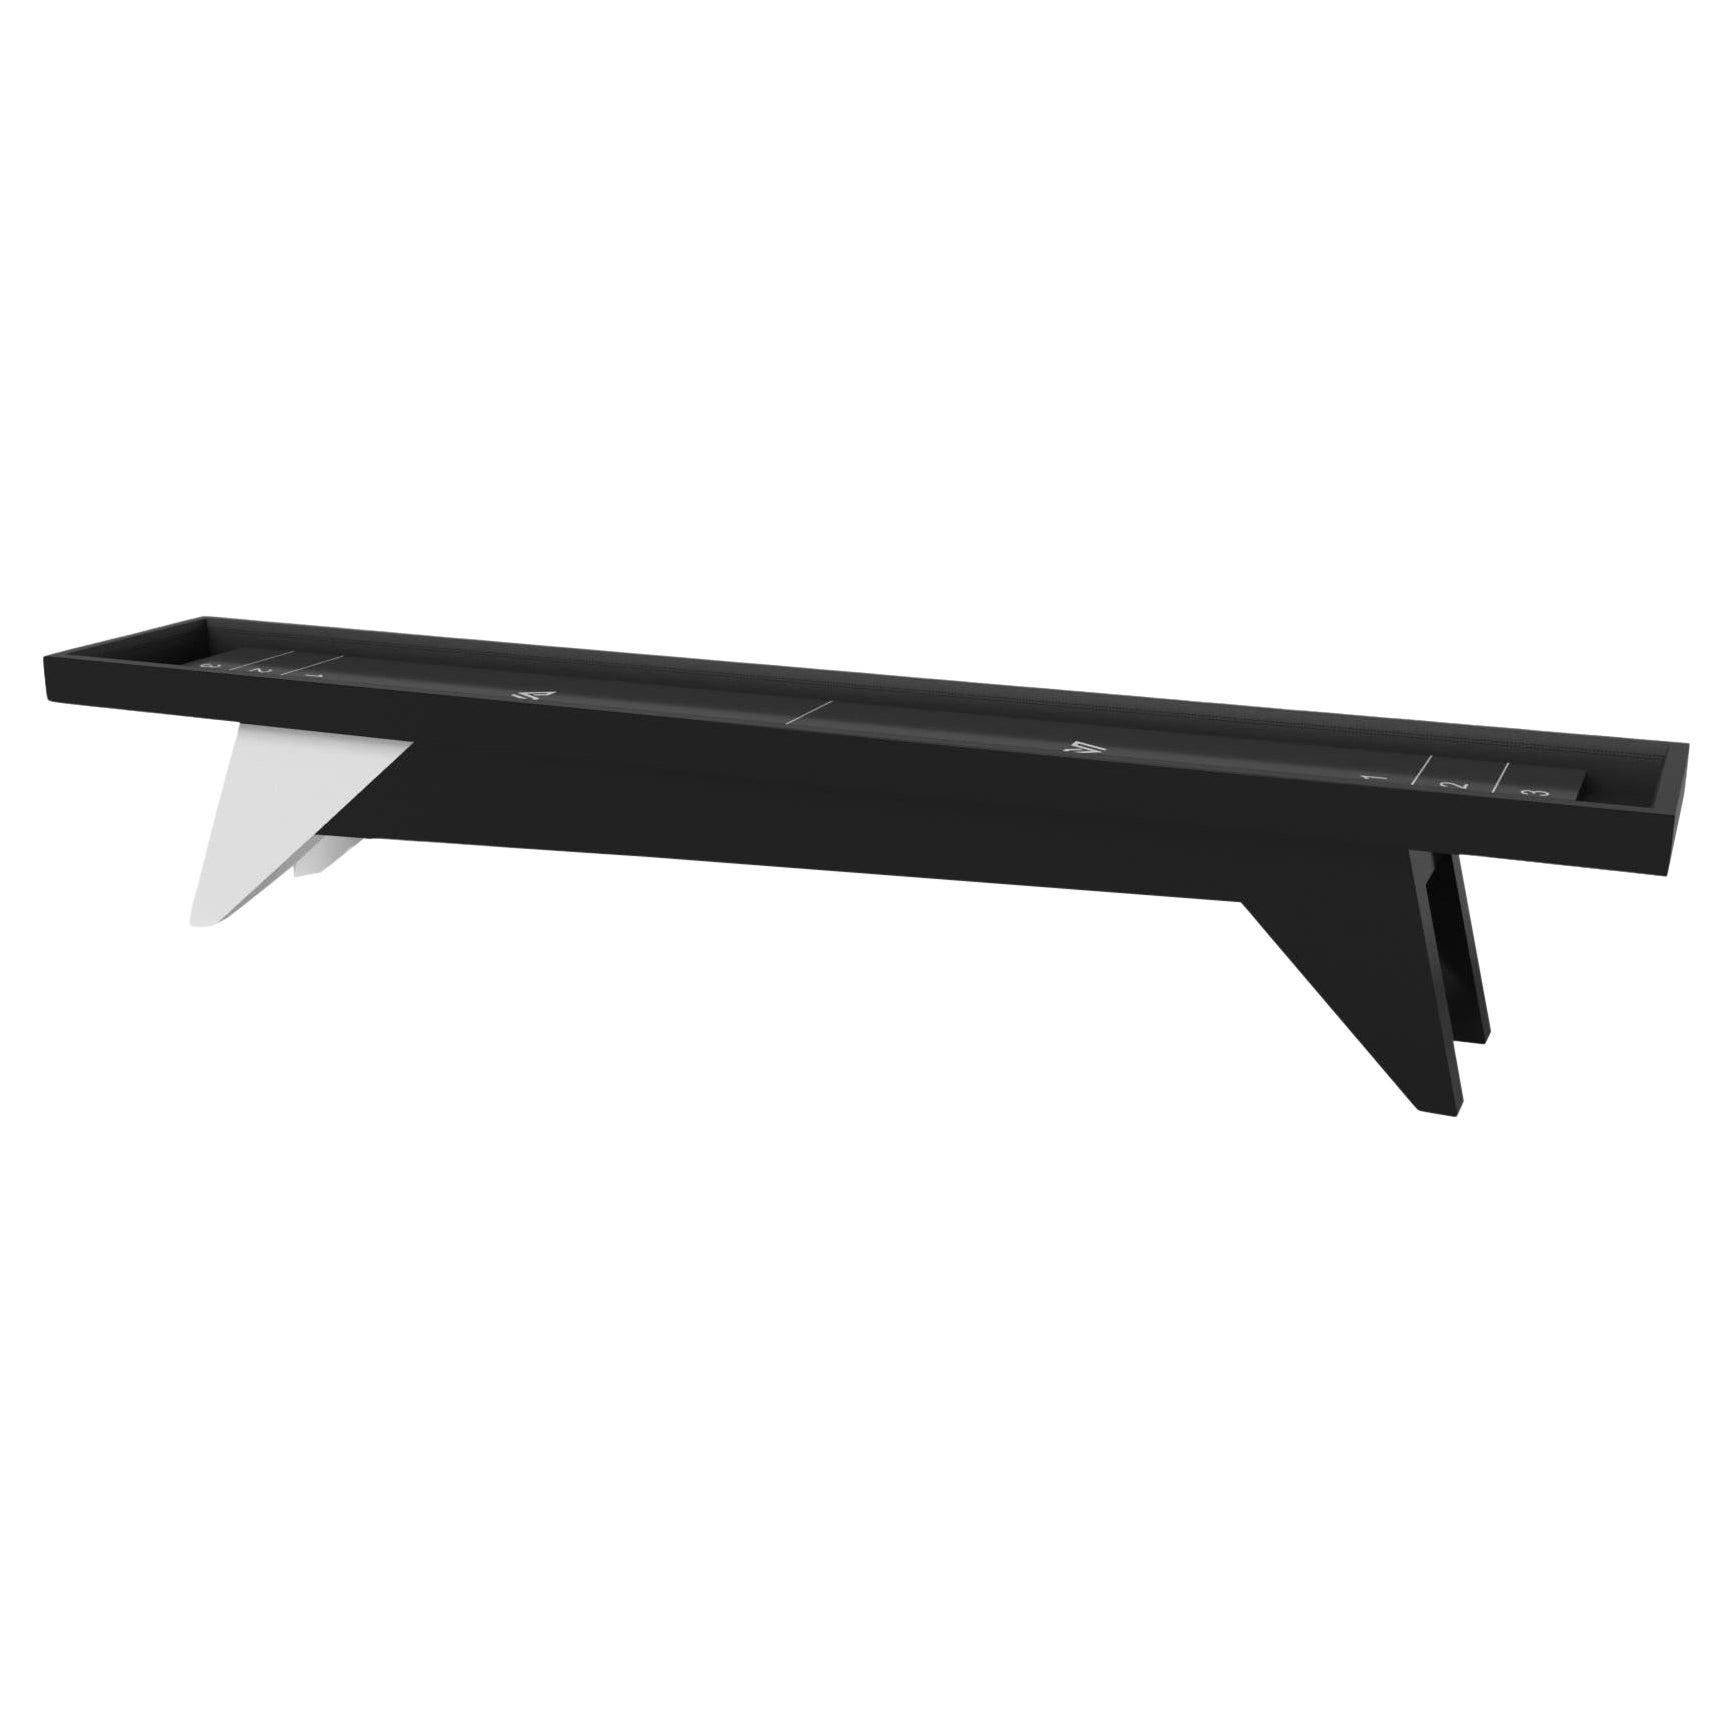 Elevate Customs Mantis Shuffleboard Tables /Solid Pantone Black Color in 16'-USA For Sale